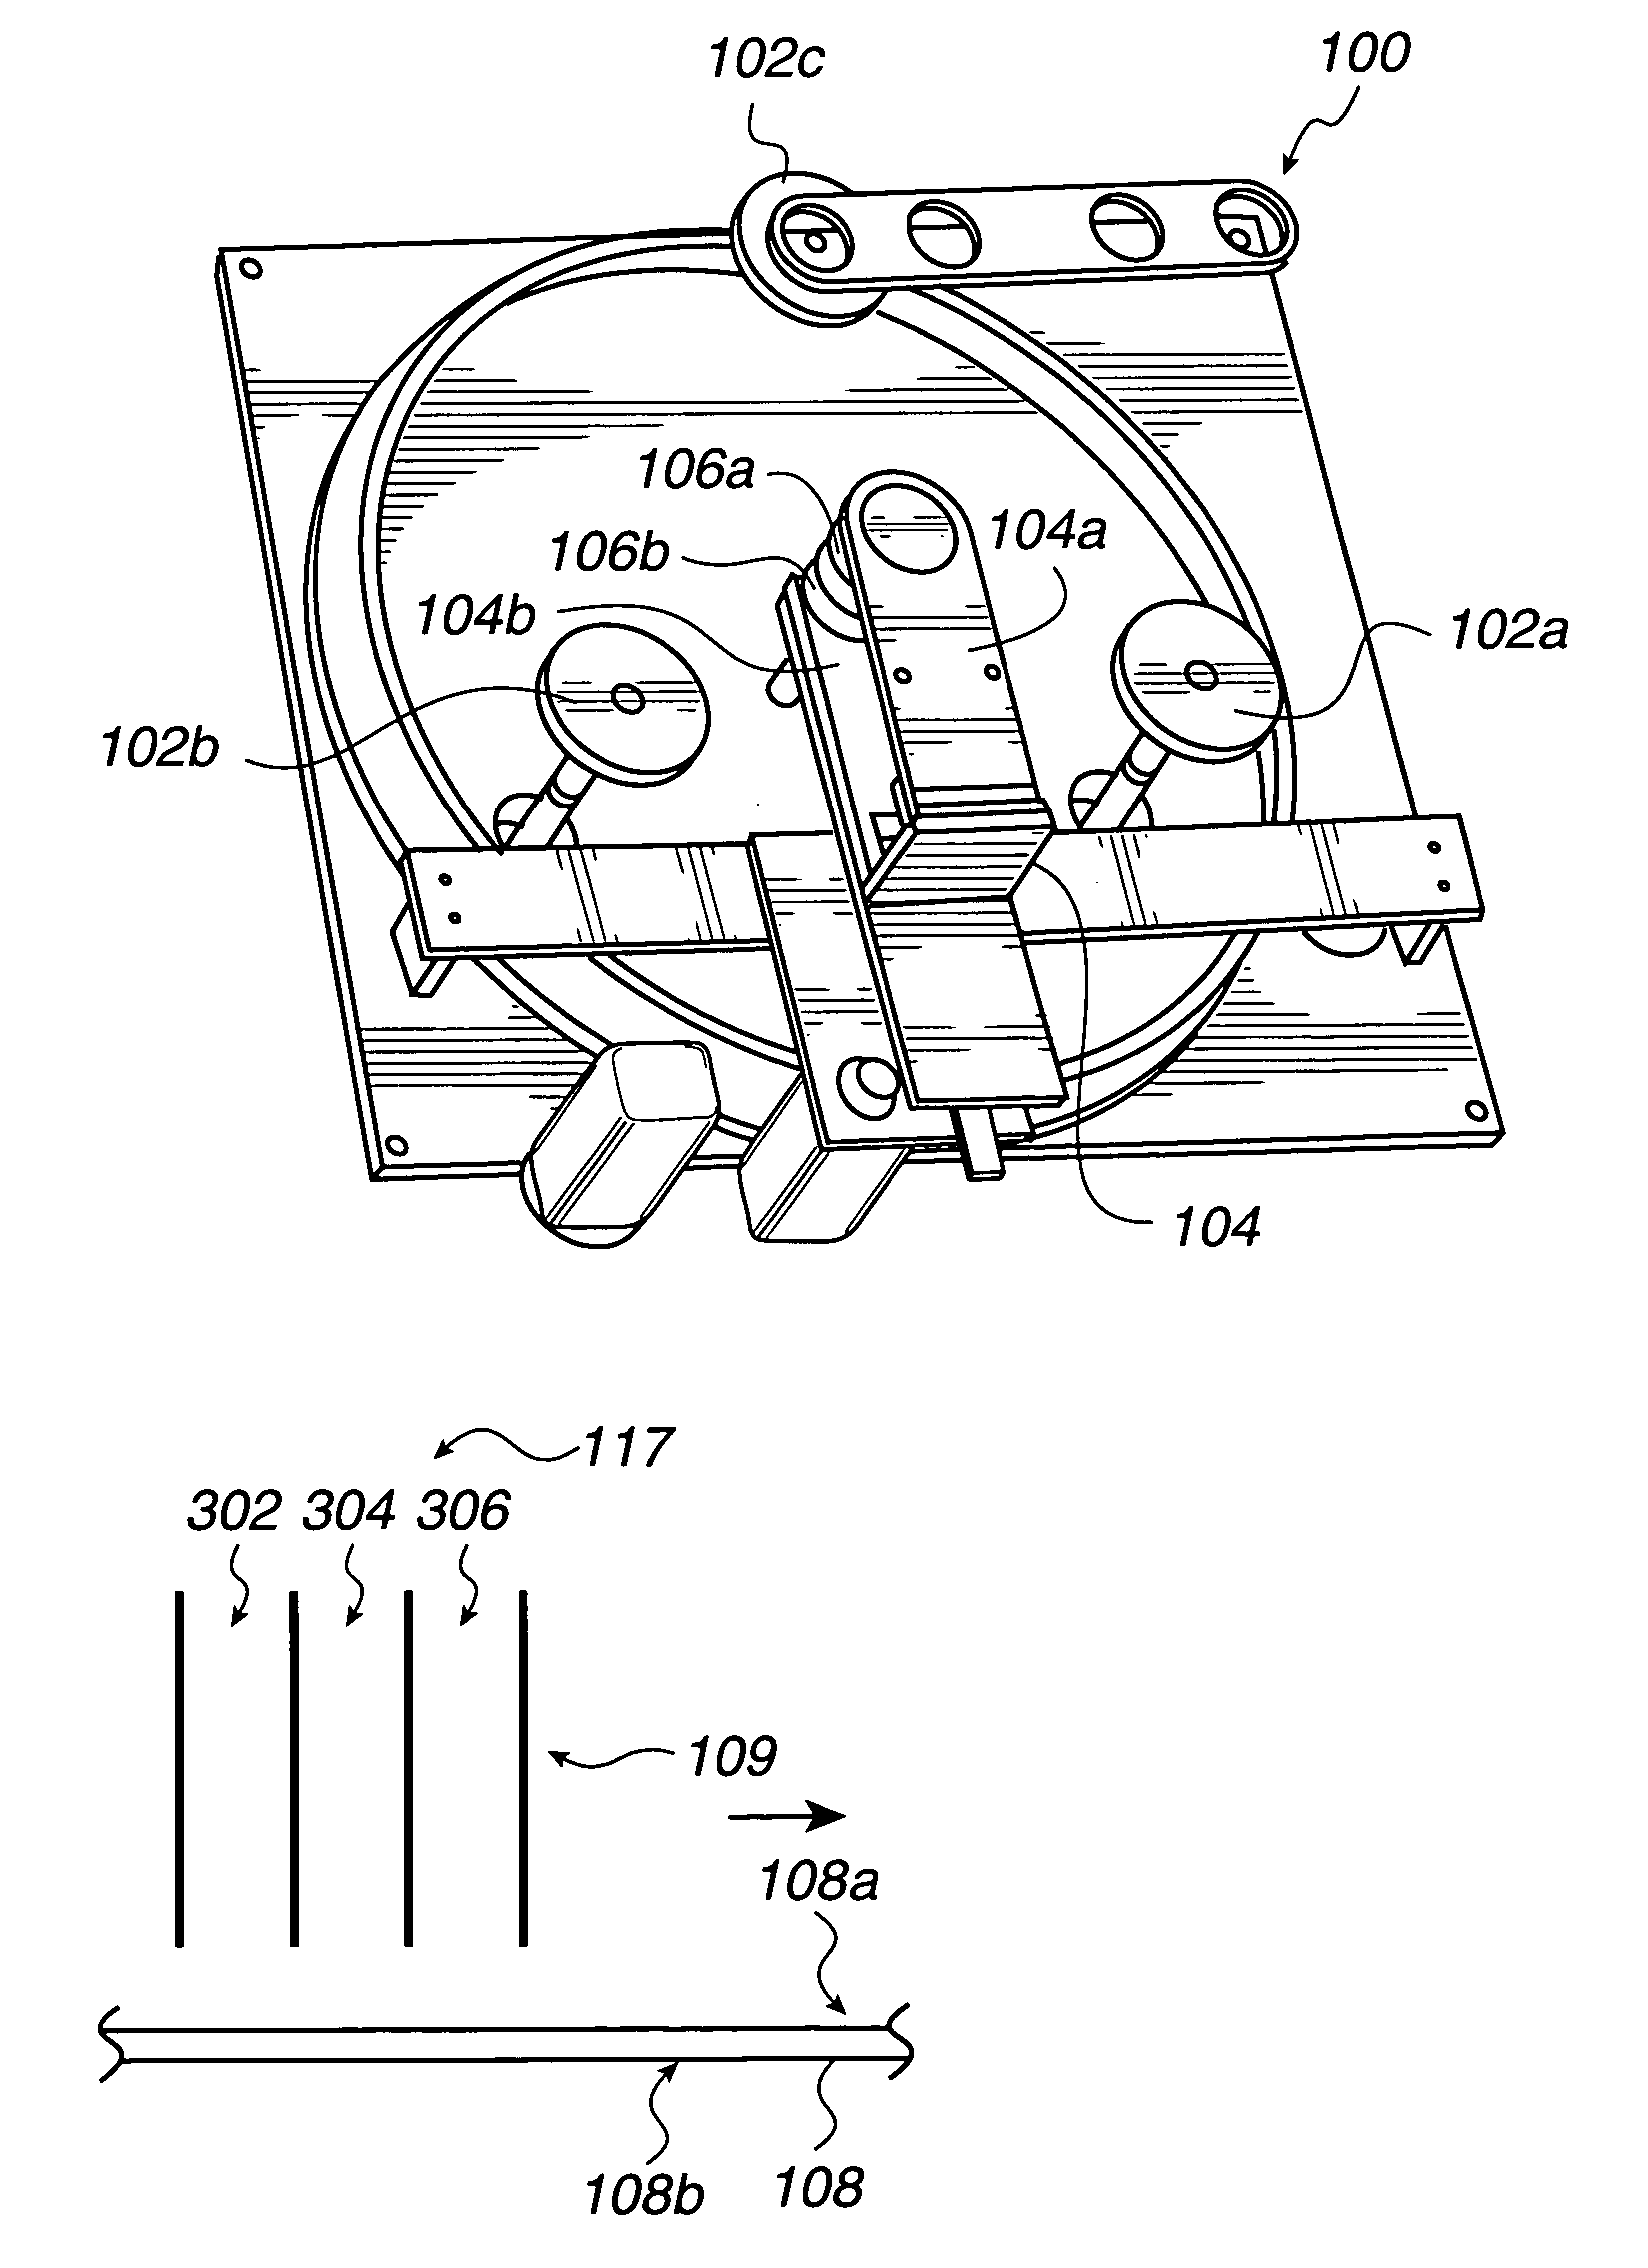 System and method for integrating in-situ metrology within a wafer process